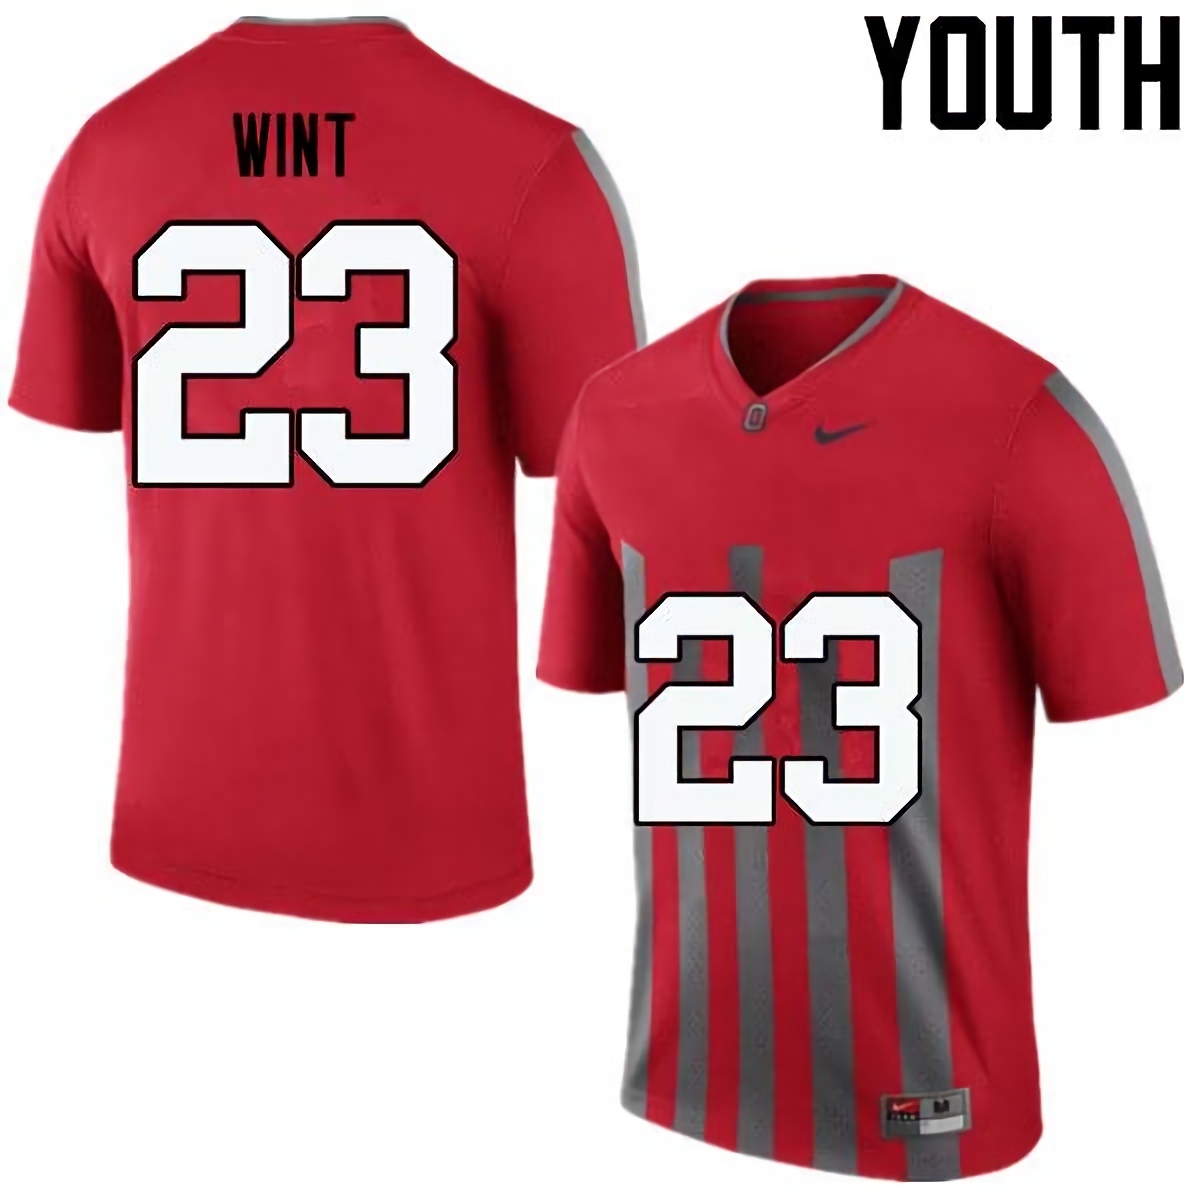 Jahsen Wint Ohio State Buckeyes Youth NCAA #23 Nike Throwback Red College Stitched Football Jersey OTM1556IZ